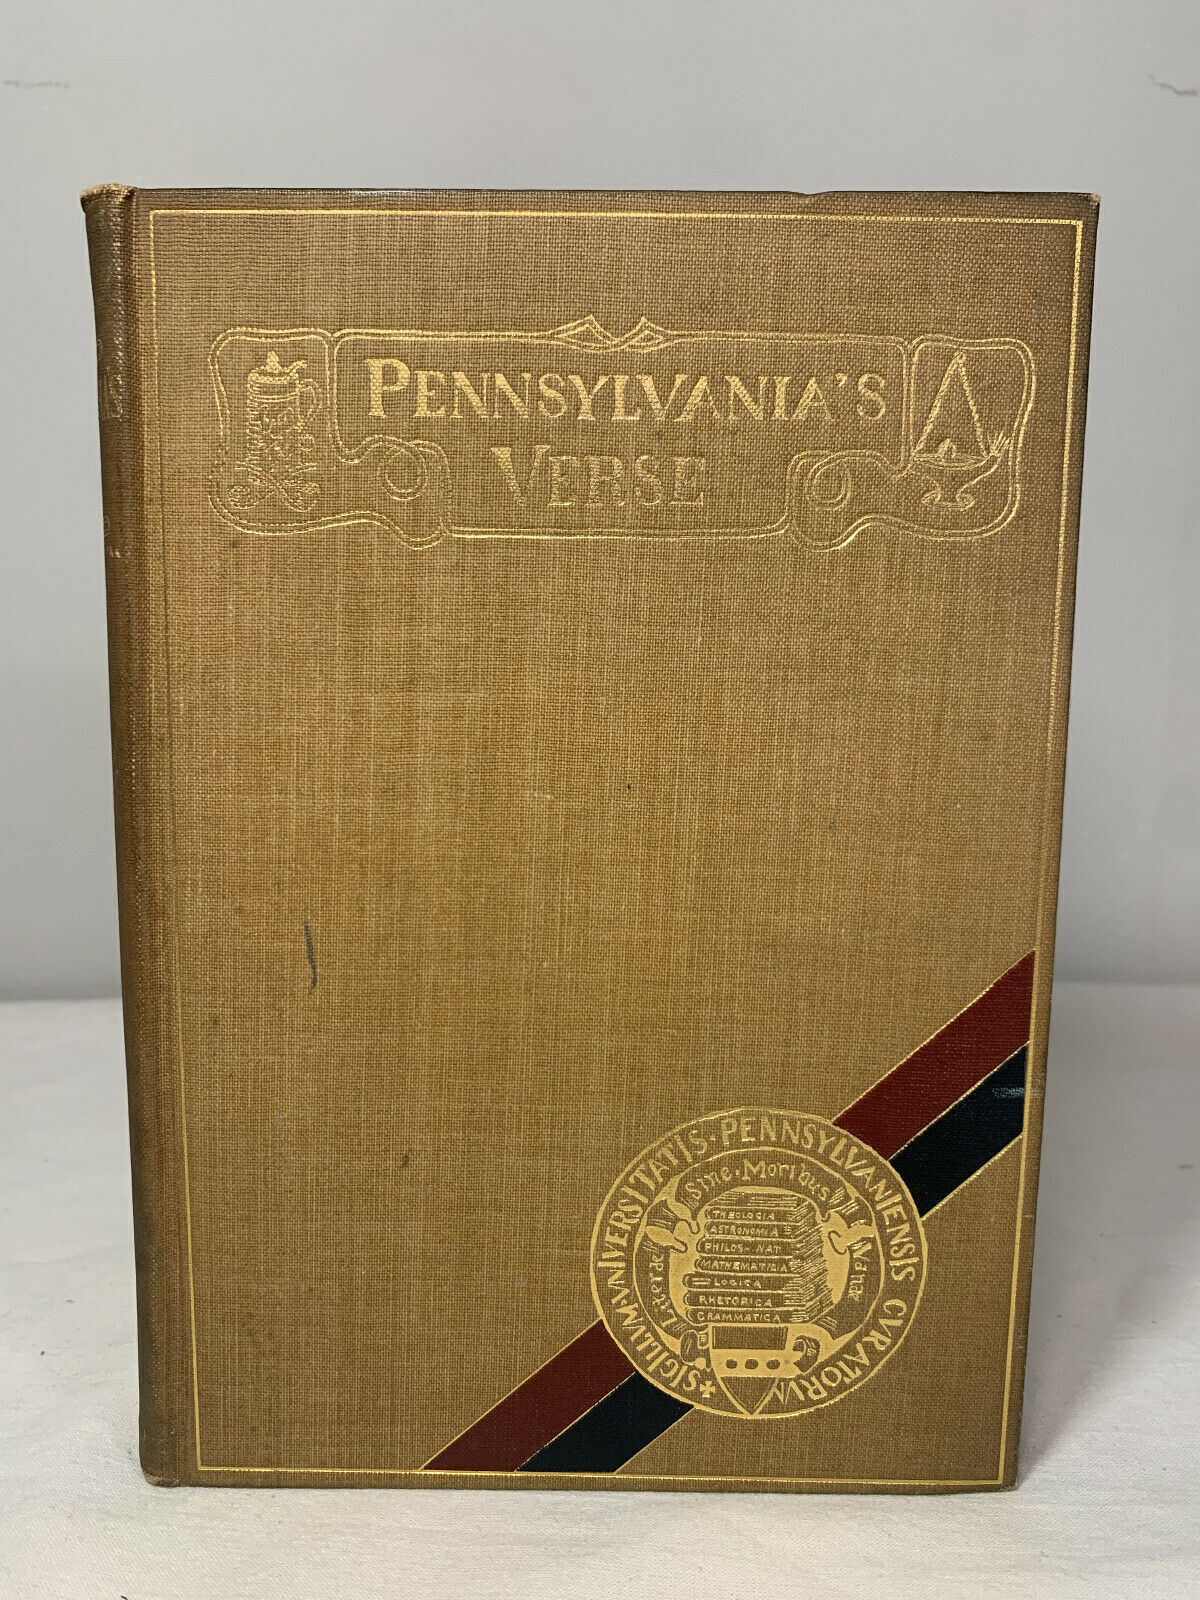 Pennsylvania Verse edited by William Otto Miller 1902 Hardcover # 355 of 1000